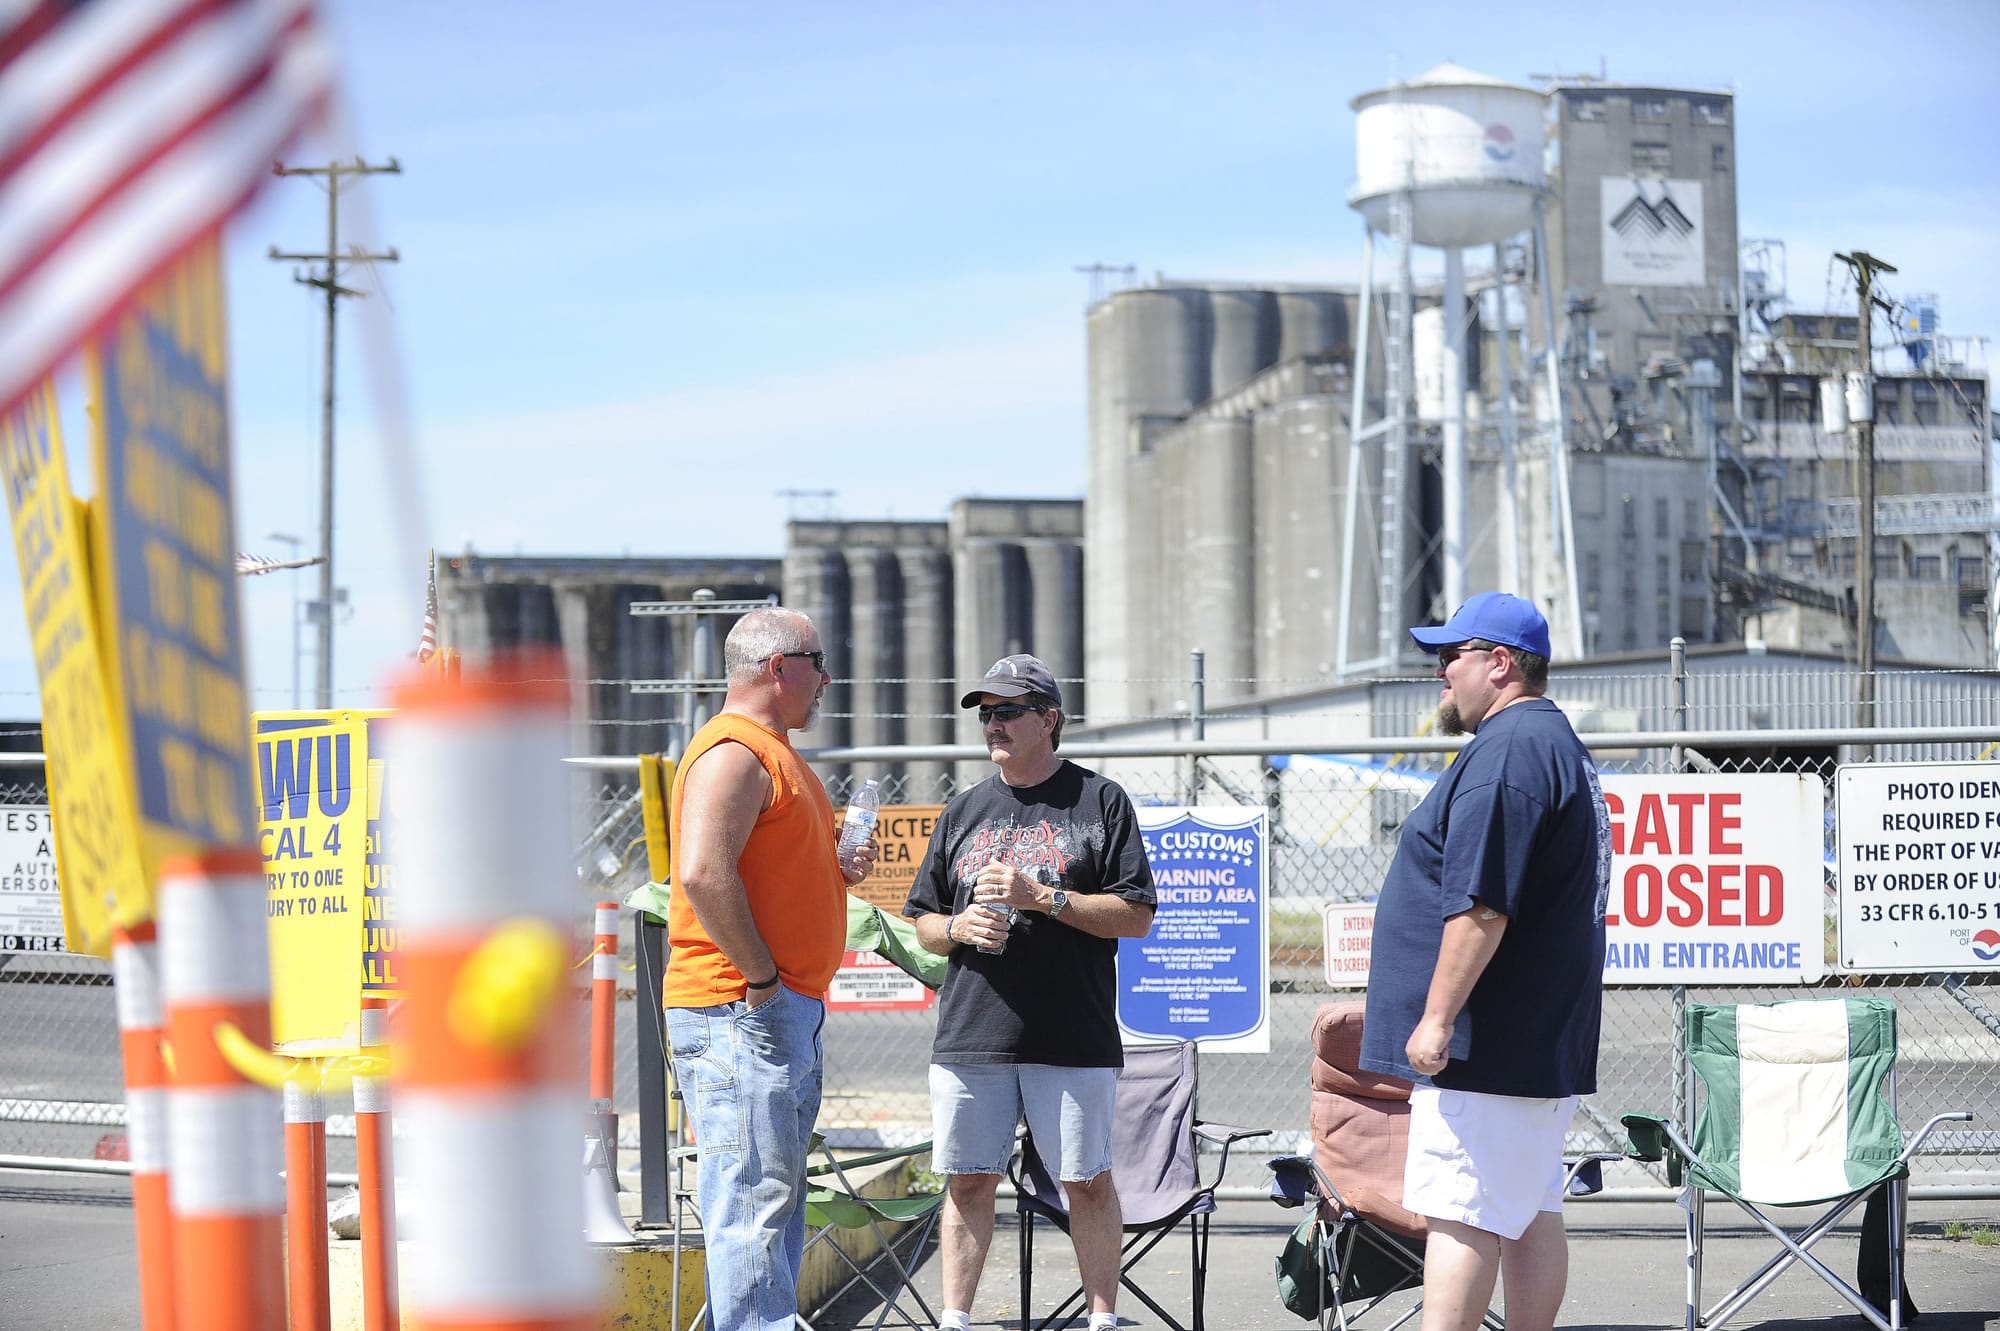 International Longshore and Warehouse Union members John Seidl, from left, Bob Poppe and Shawn Unger picket outside the Port of Vancouver on May 6.